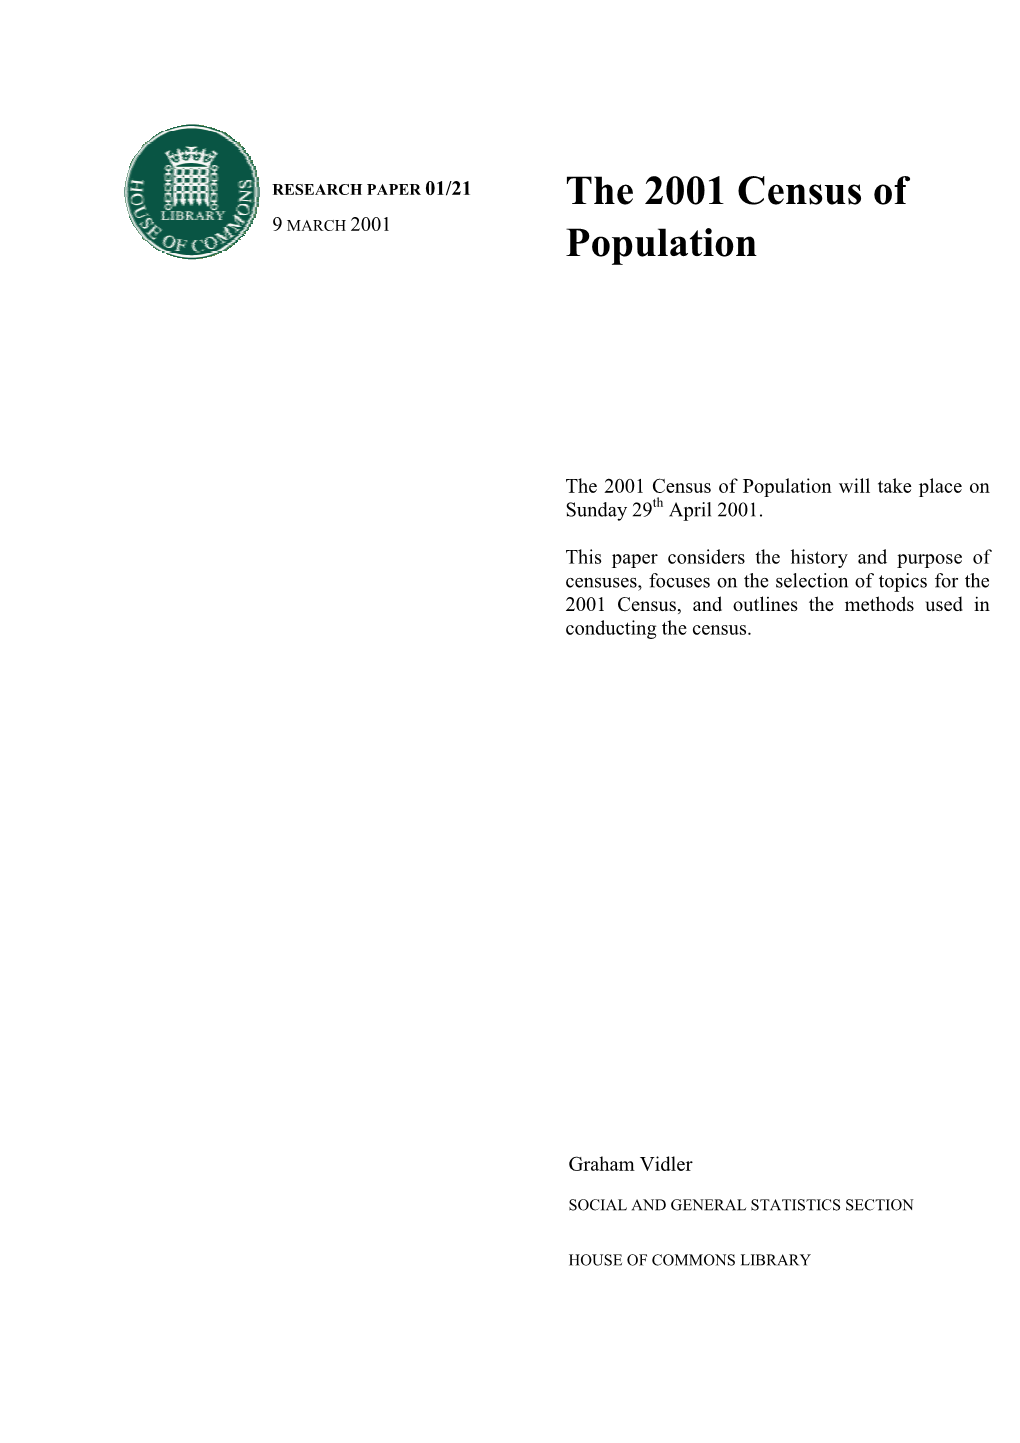 The 2001 Census of Population Will Take Place on Sunday 29Th April 2001